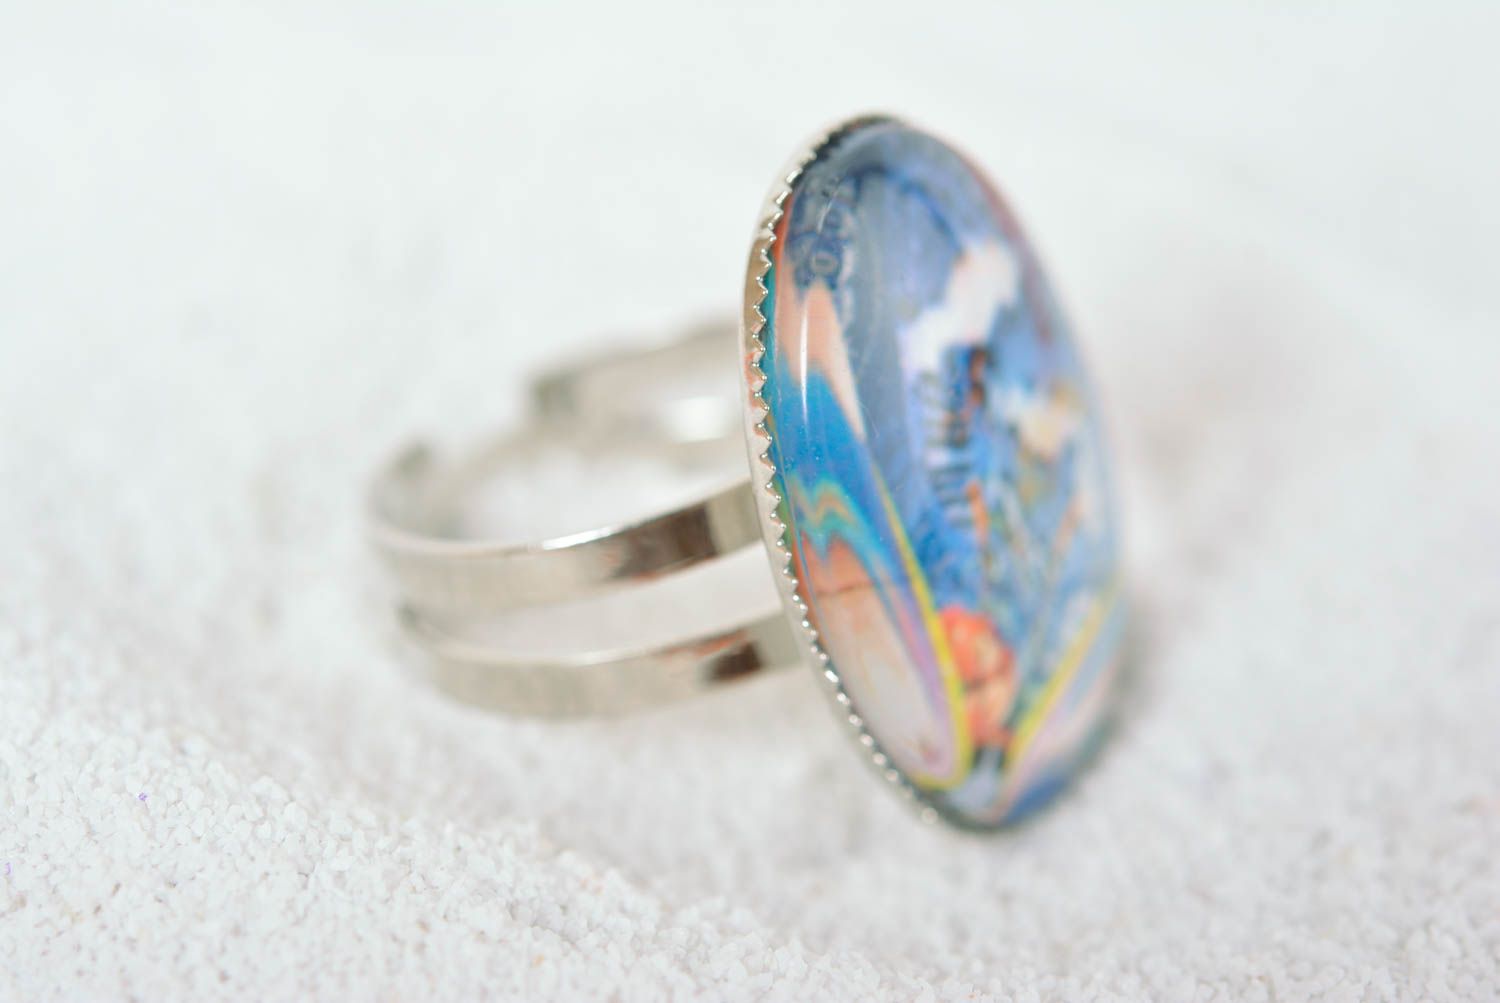 Beautiful rings homemade jewelry fashion accessories seal ring designer jewelry photo 1